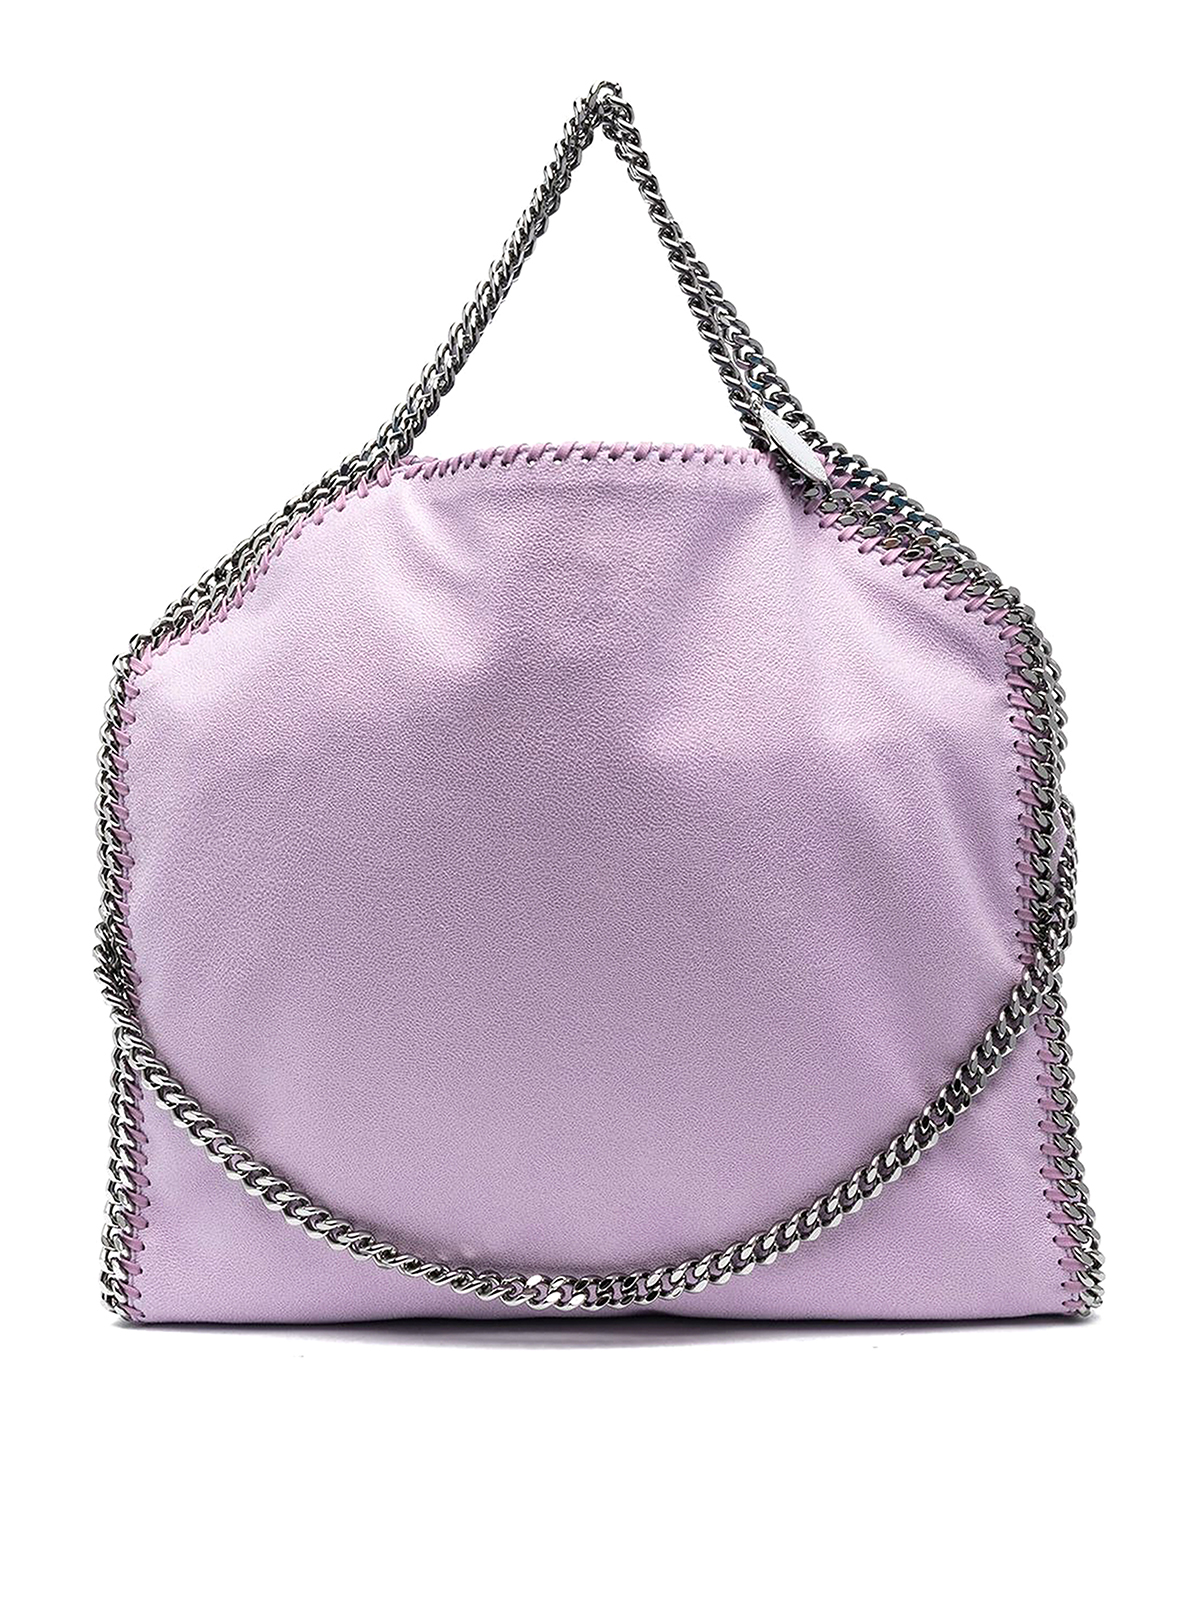 Stella Mccartney Falabella Faux Leather Bag With Chain Trim In Purple